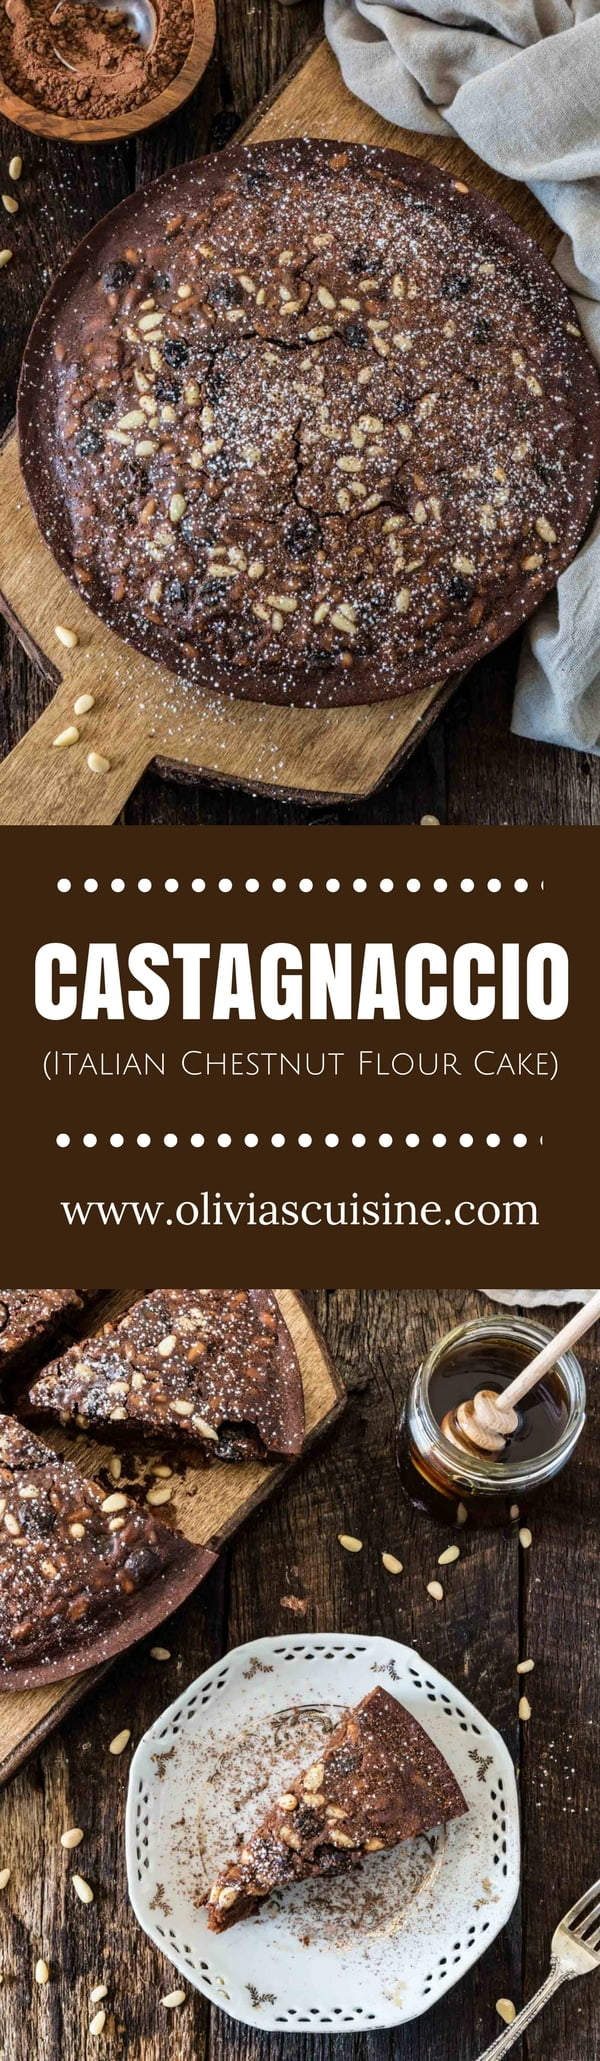 Castagnaccio Pugliese (Chestnut Flour Cake) | www.oliviascuisine.com | An Italian autumnal classic, the Castagnaccio is a gluten-free cake made of chestnut flour, olive oil, dried fruits and nuts. Served with a cup of espresso (or wine) and a drizzle of honey, it is the perfect treat on a cold afternoon.